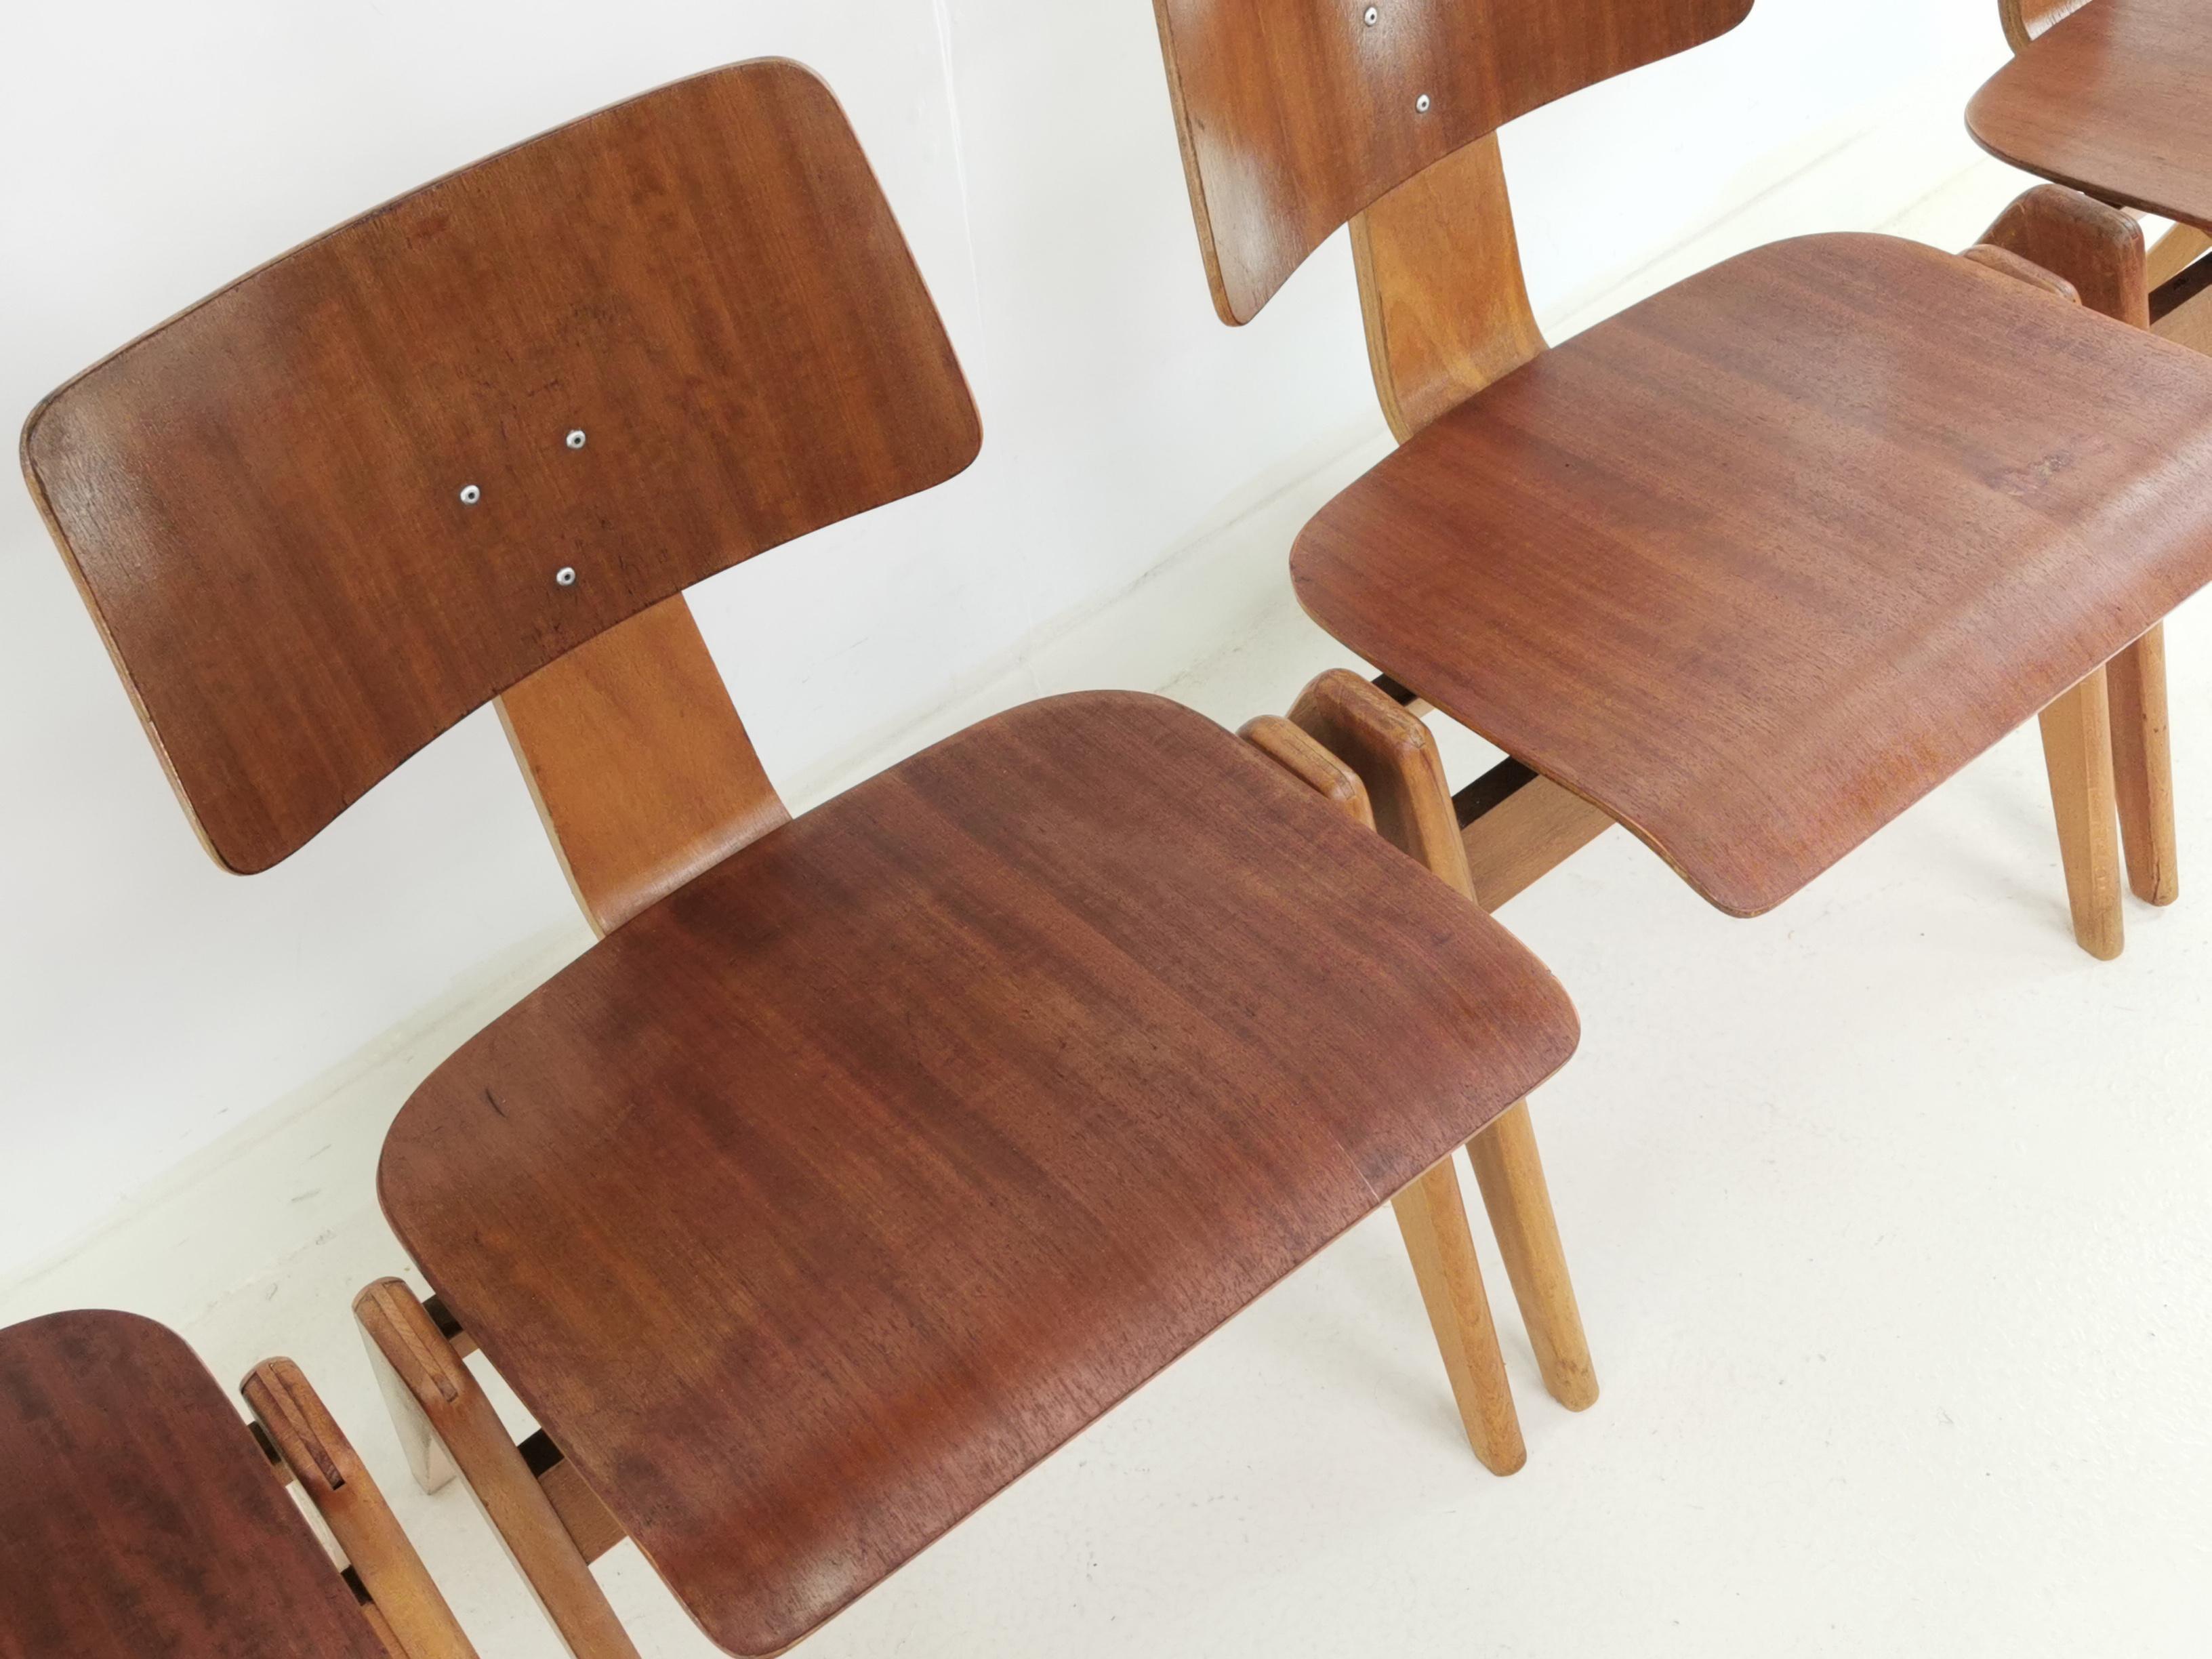 Hillestak dining chairs

Set of four, British ‘Hillestak’ bentwood chairs, mid-century, circa 50s, designed by Robin Day and manufactured by Hille. The chairs are designed to stack.

Robin Day was an iconic British industrial designer, best